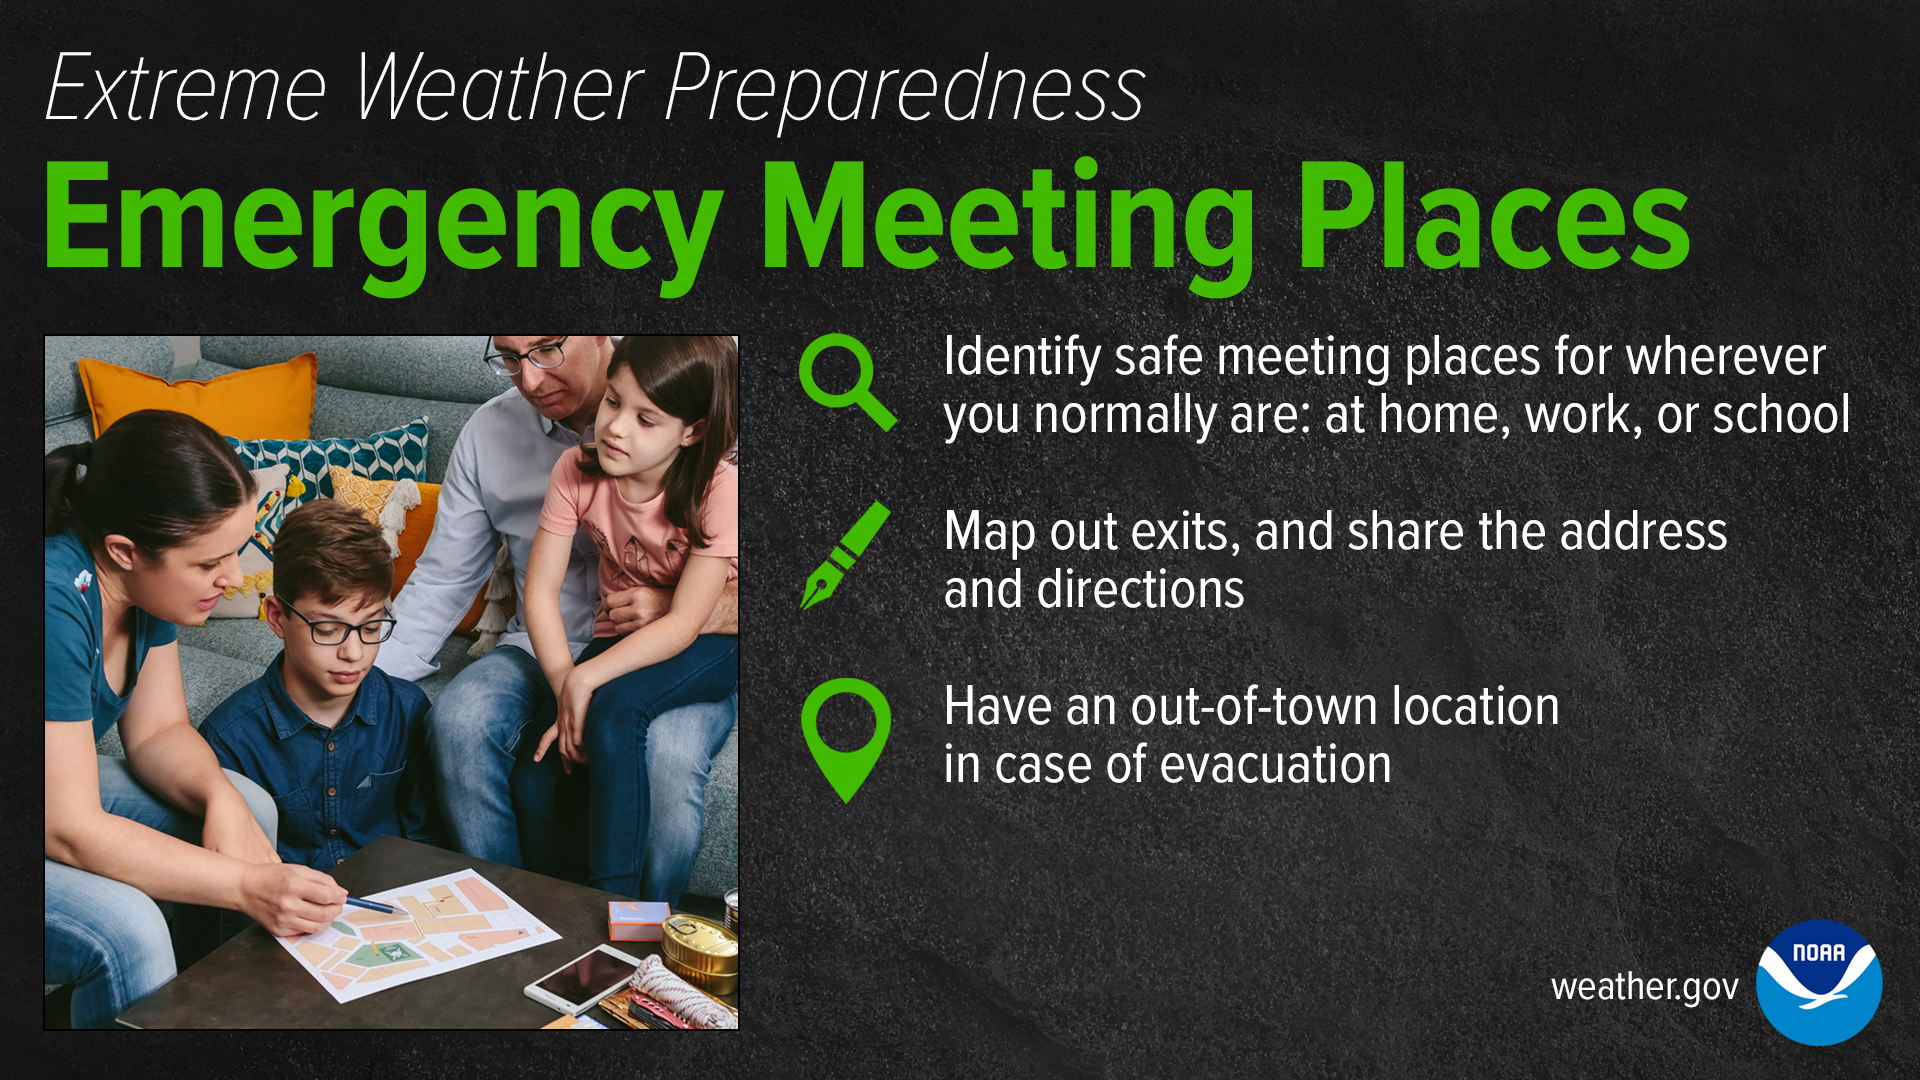 Extreme Weather Preparedness: Emergency Meeting Places. Identify safe meeting places for whereever you normall are: at home, work, or school. Map out exits, and share the address and directions. Have an out-of-town location in case of evacuation.